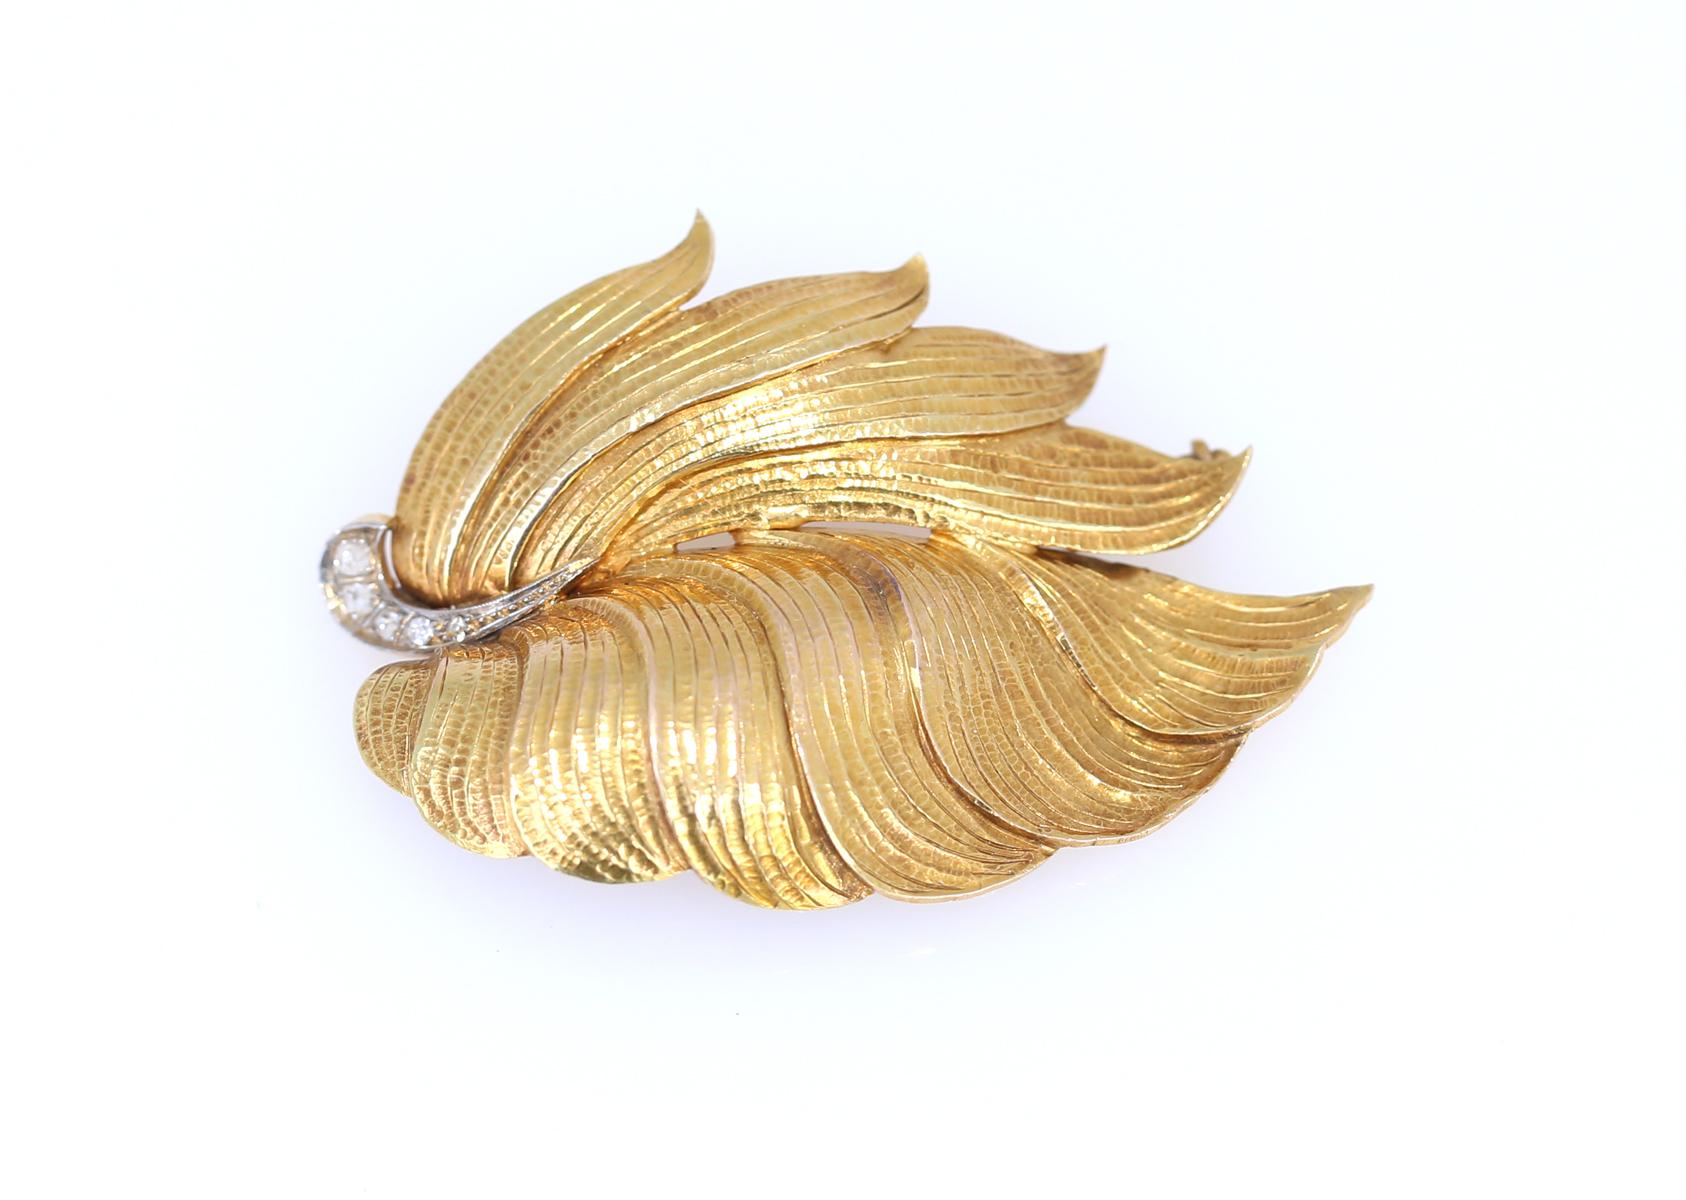 Fine brooch with natural ornament leaves on the wind. Set with small diamonds. The jeweler craft is just outstanding, the gold really mimics the natural leave so perfectly.

Once it was common to communicate a message via pin or brooch. Nowadays